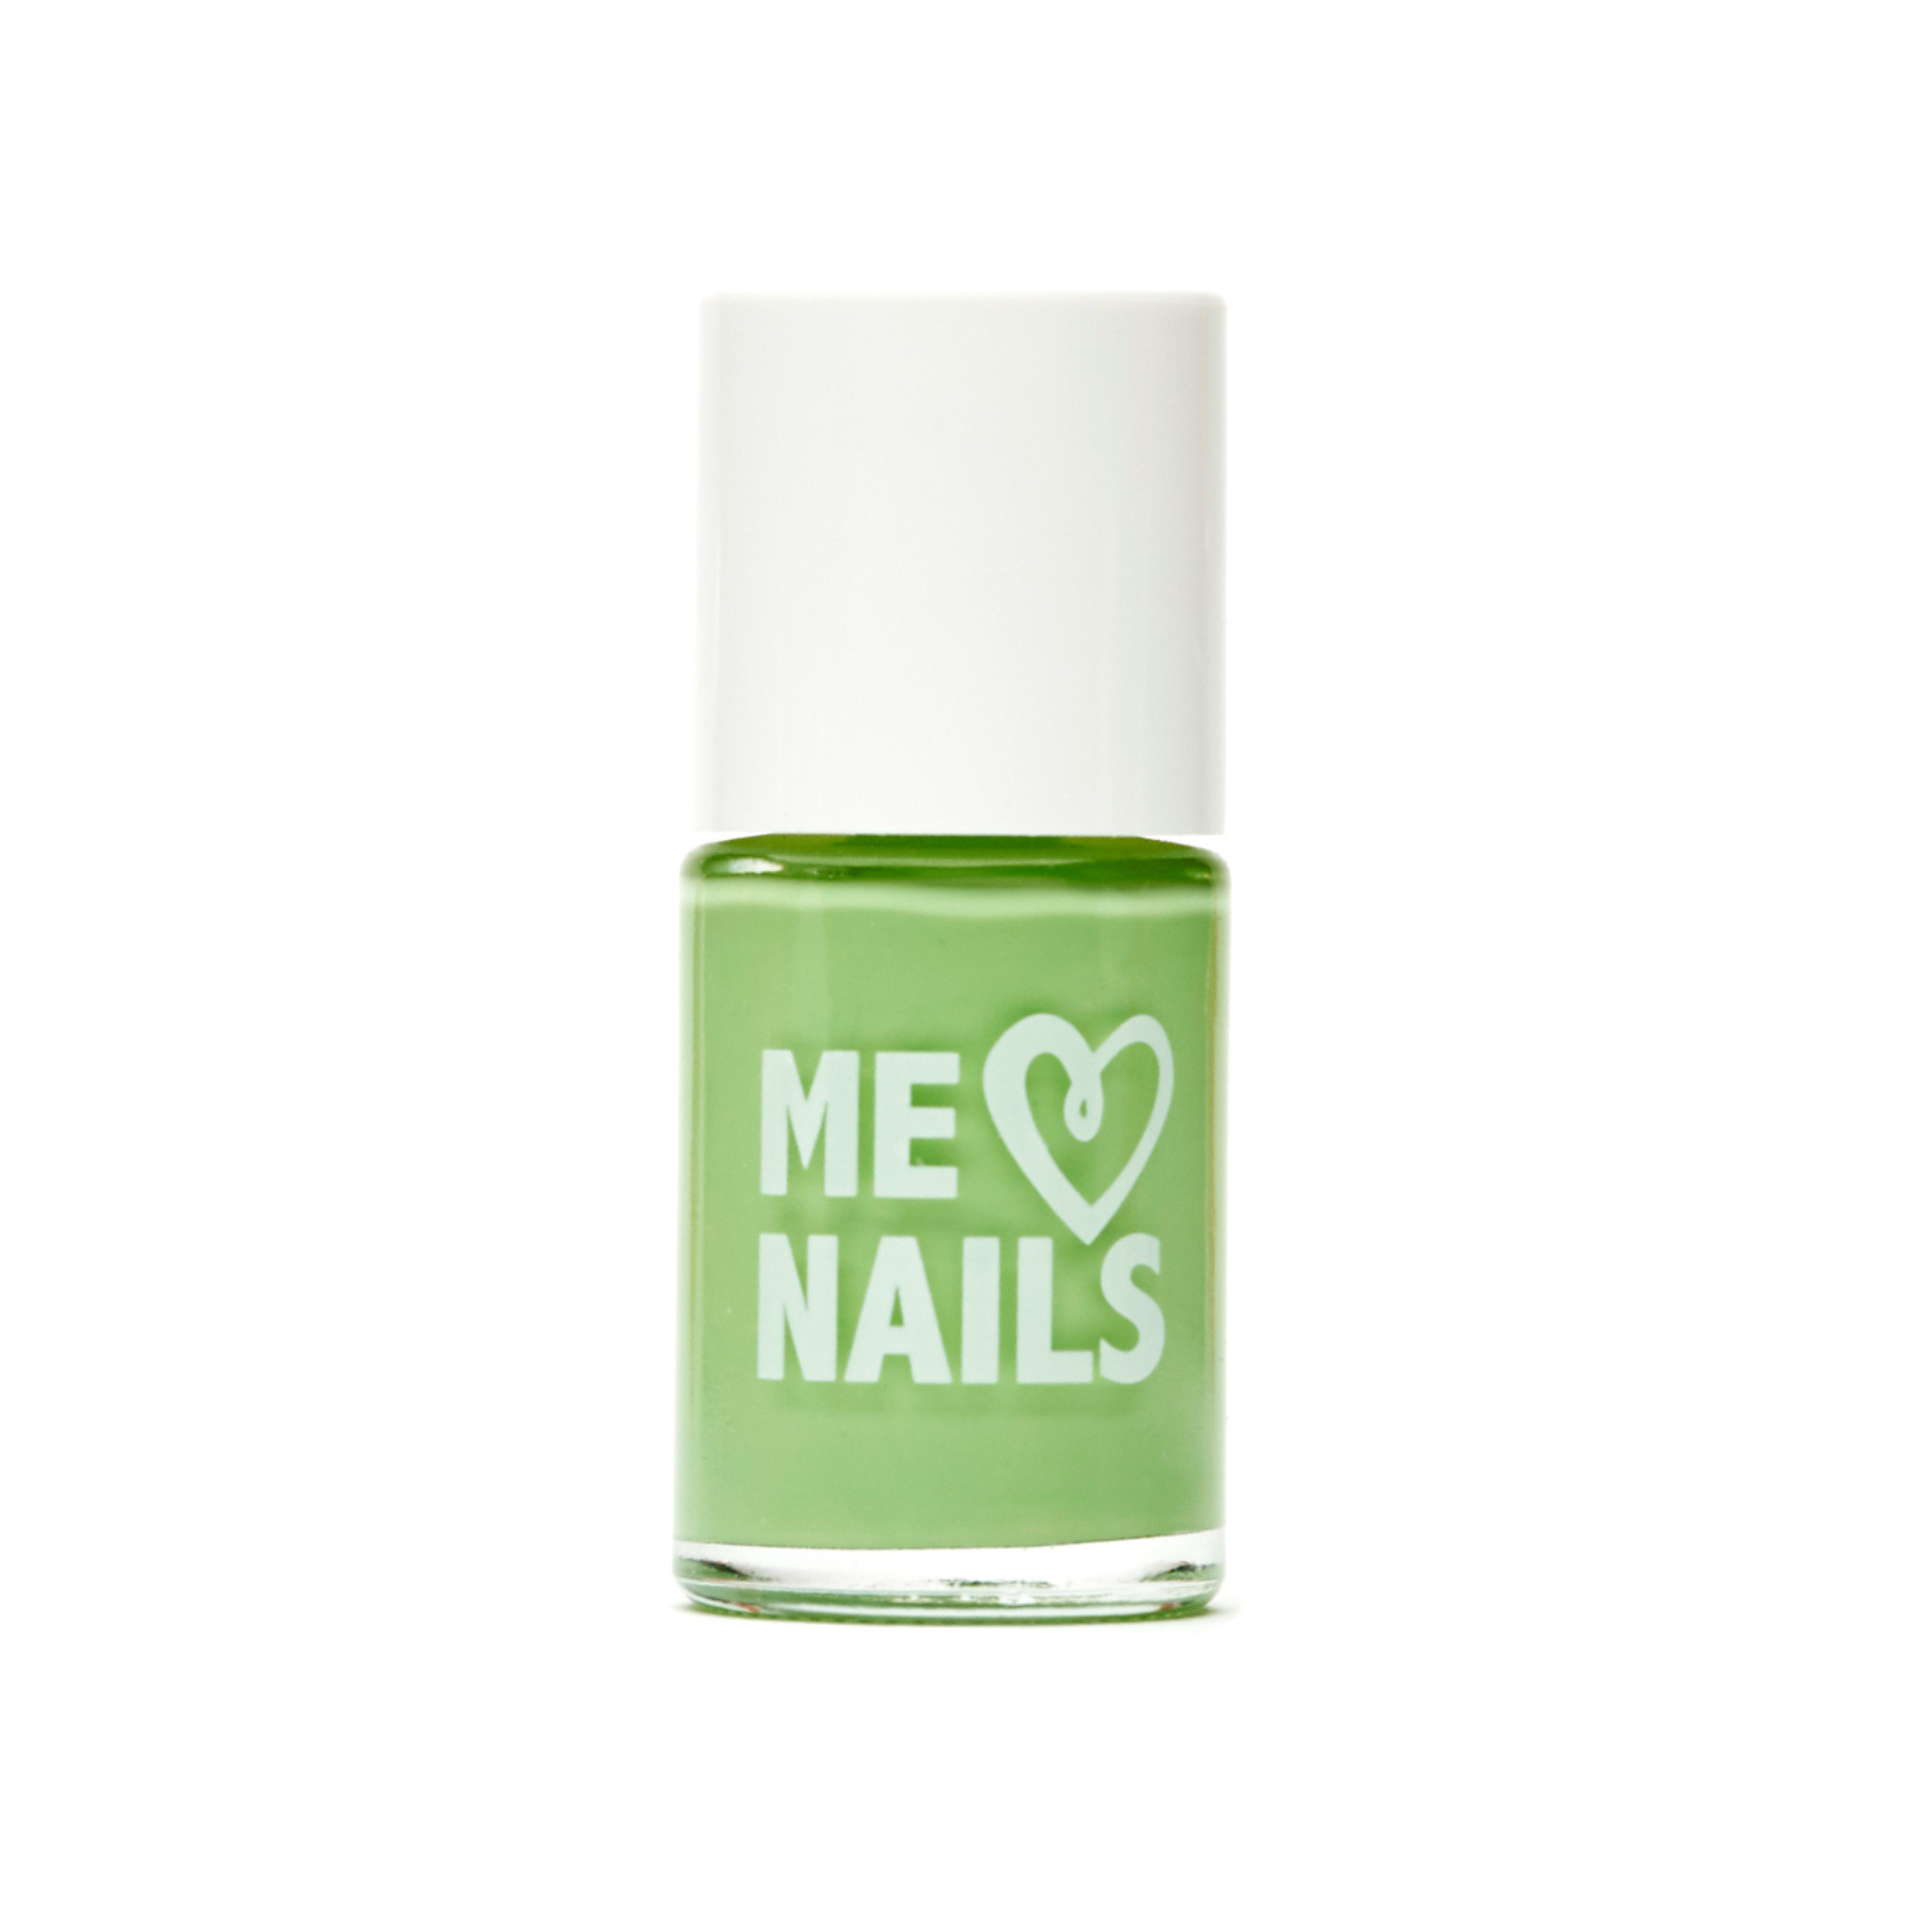 ME Nail's Key Lime Green Nail Polish created by female celebrity and YouTube star, Moriah Elizabeth.